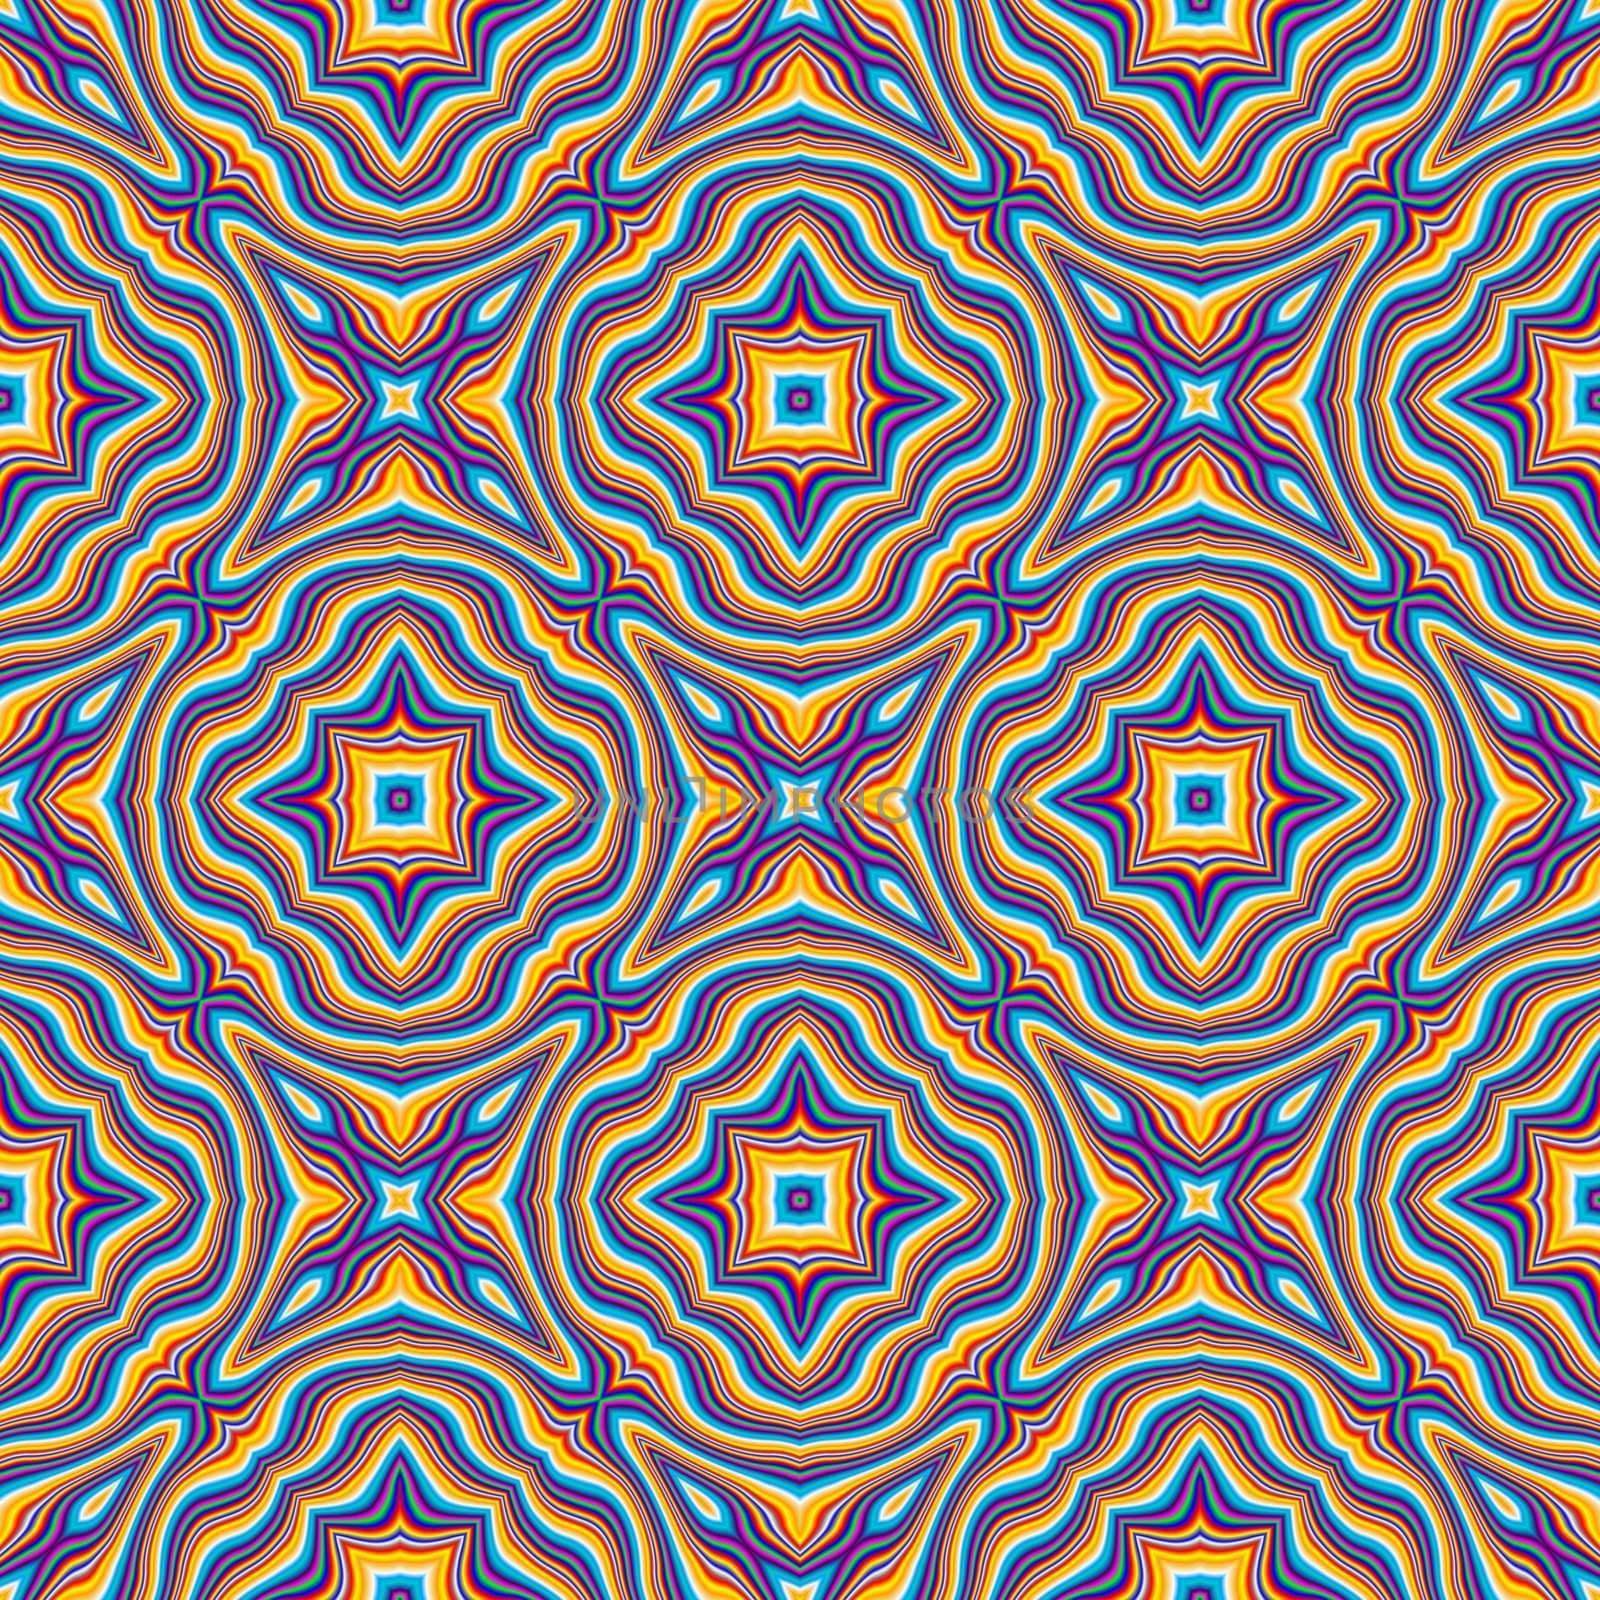 Illustration of an abstract seamless Psychedelic background